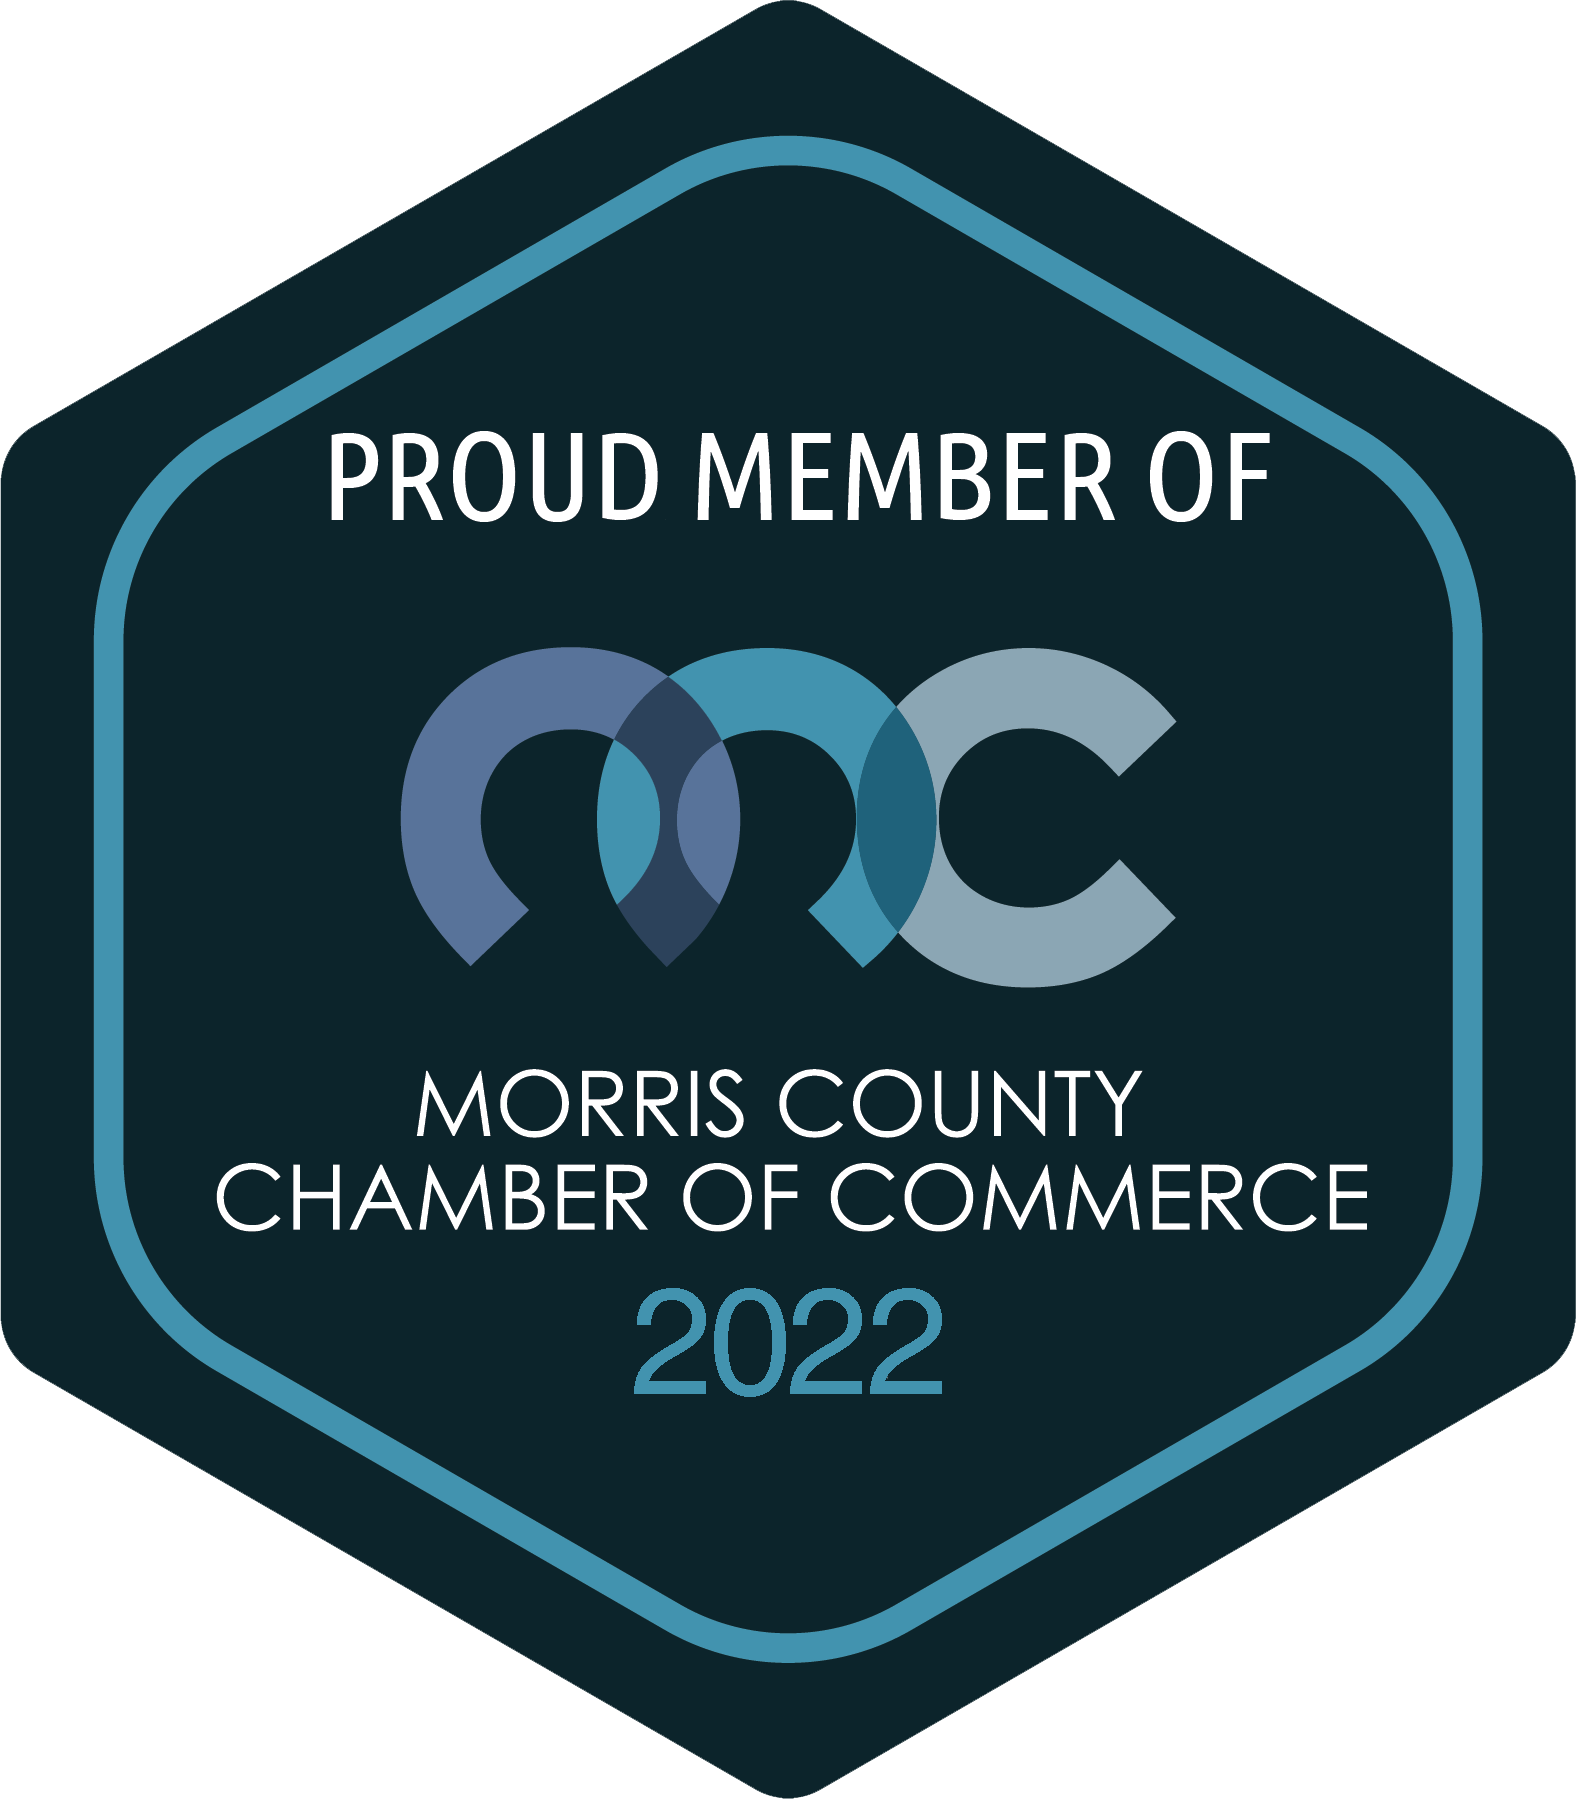 Member of the Morris County Chamber of Commerce 2022